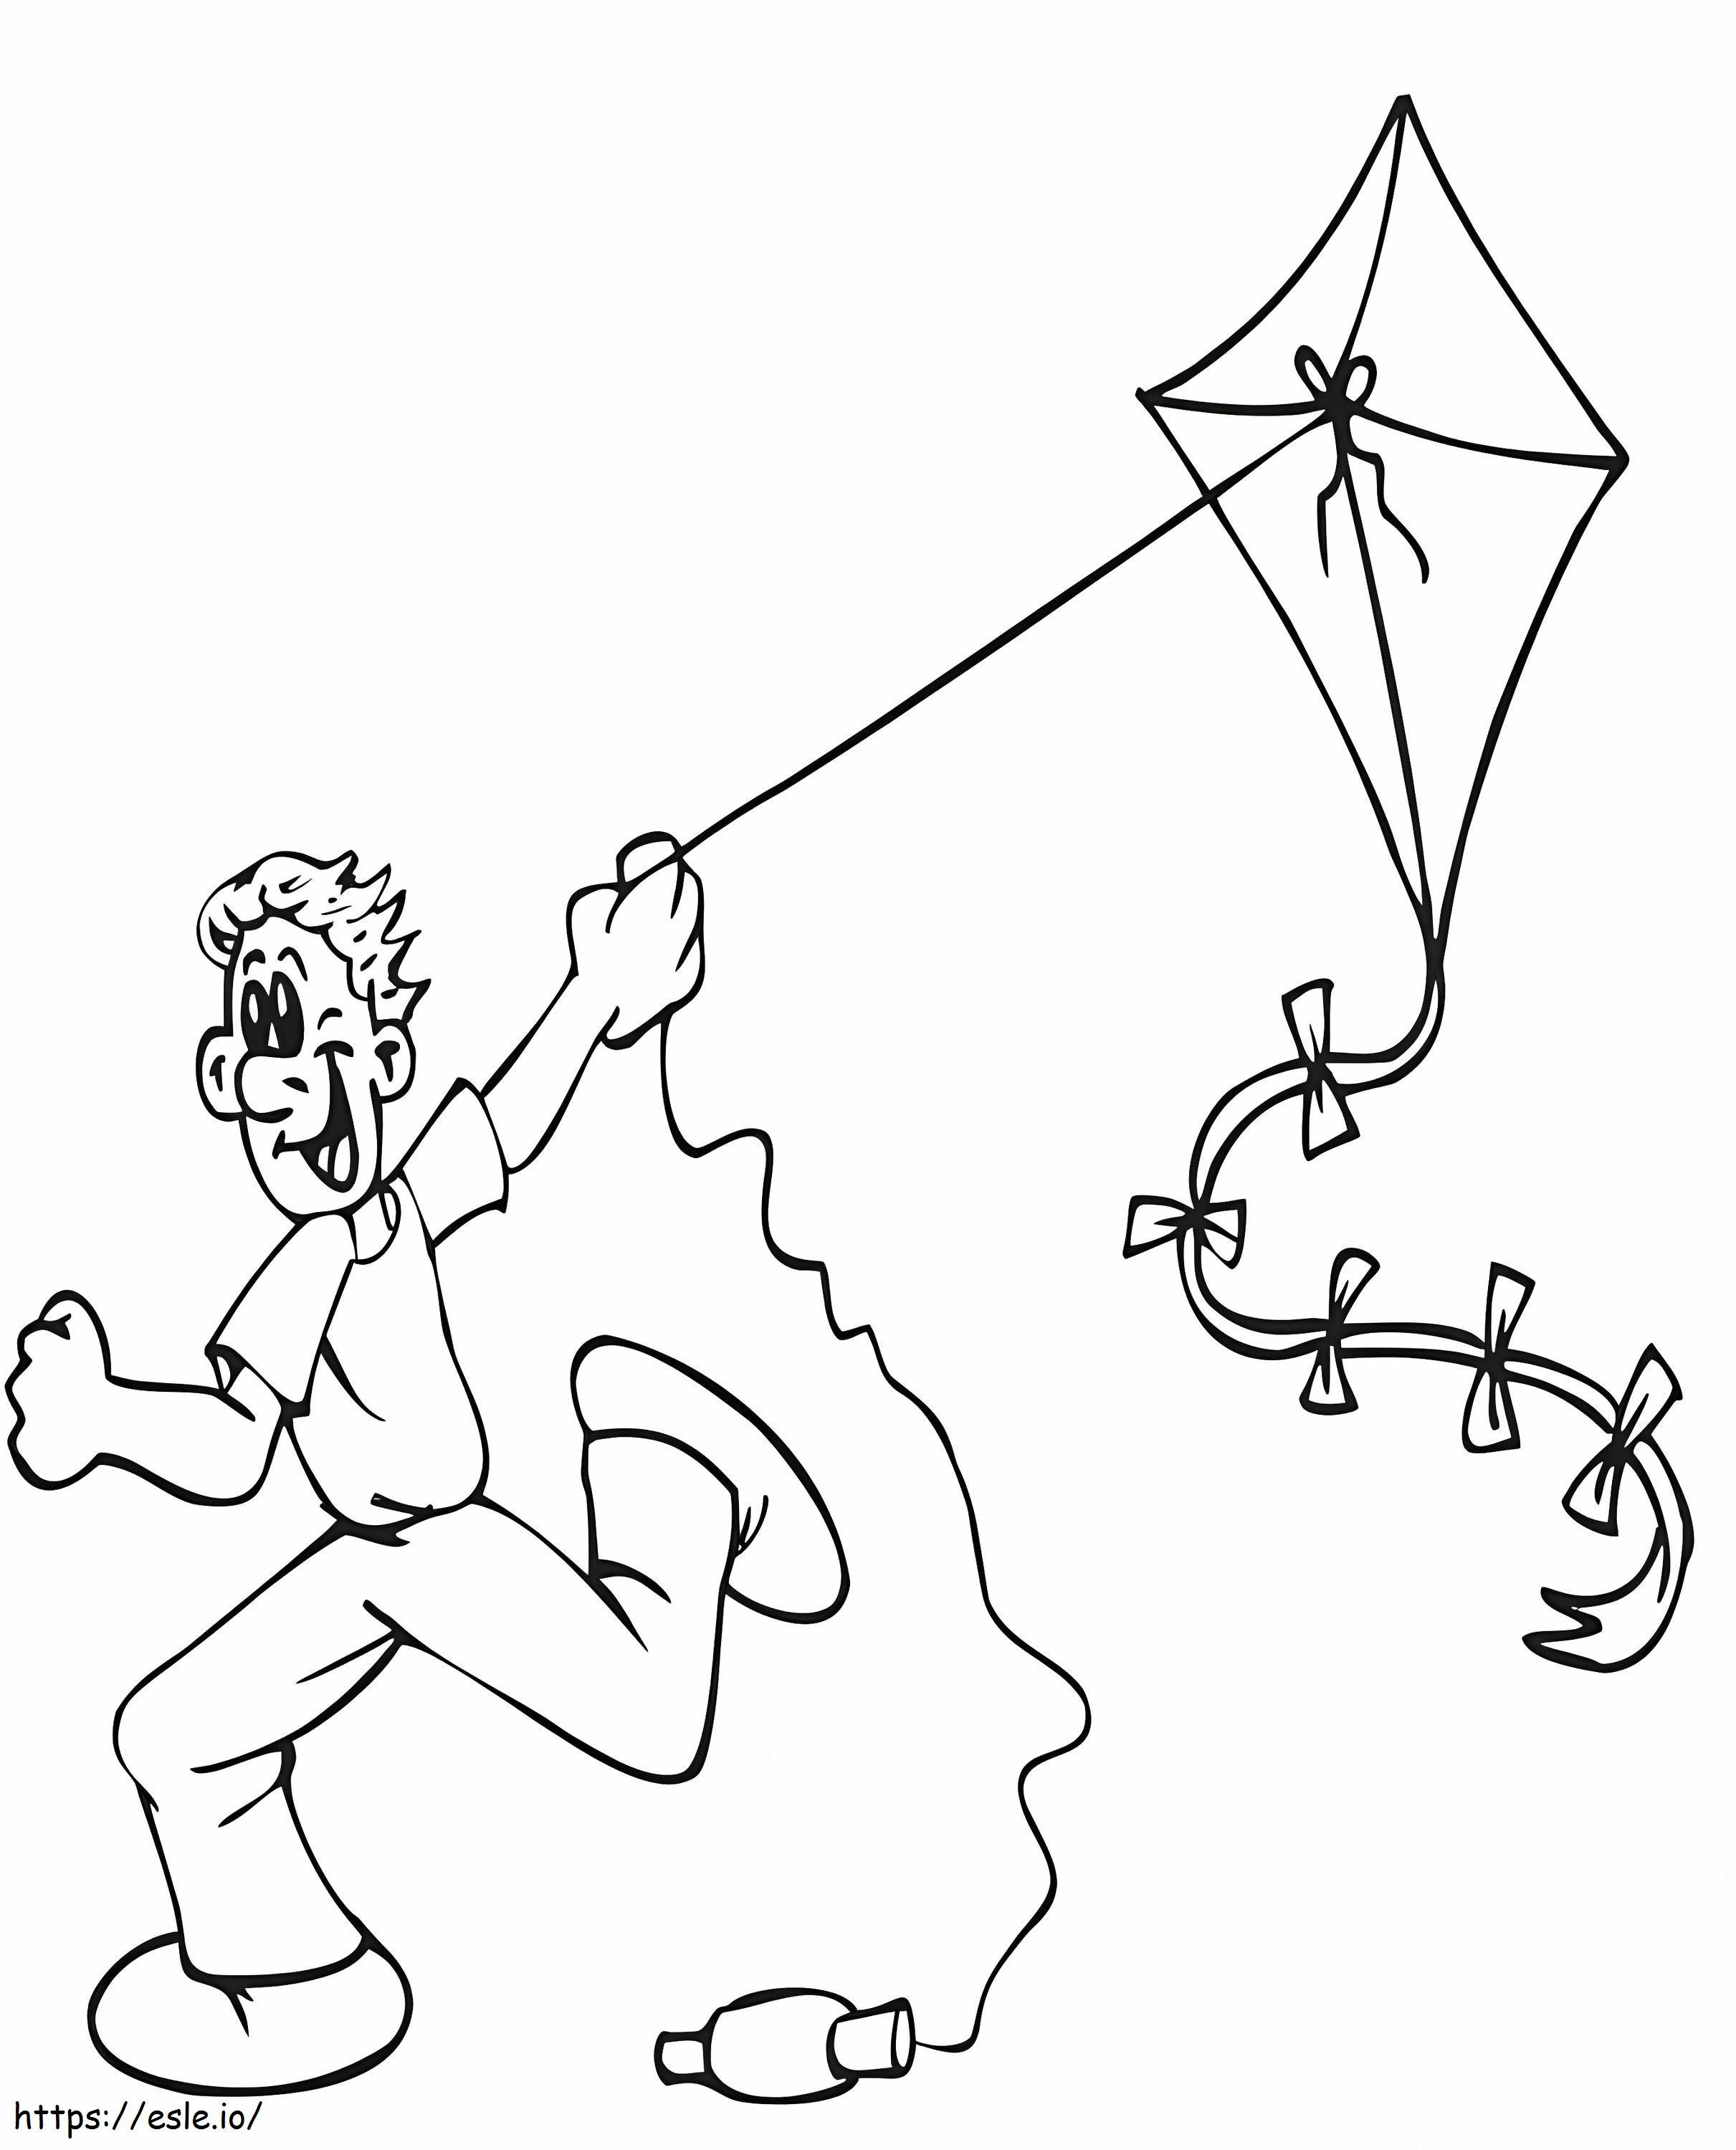 A Boy Flying A Kite coloring page